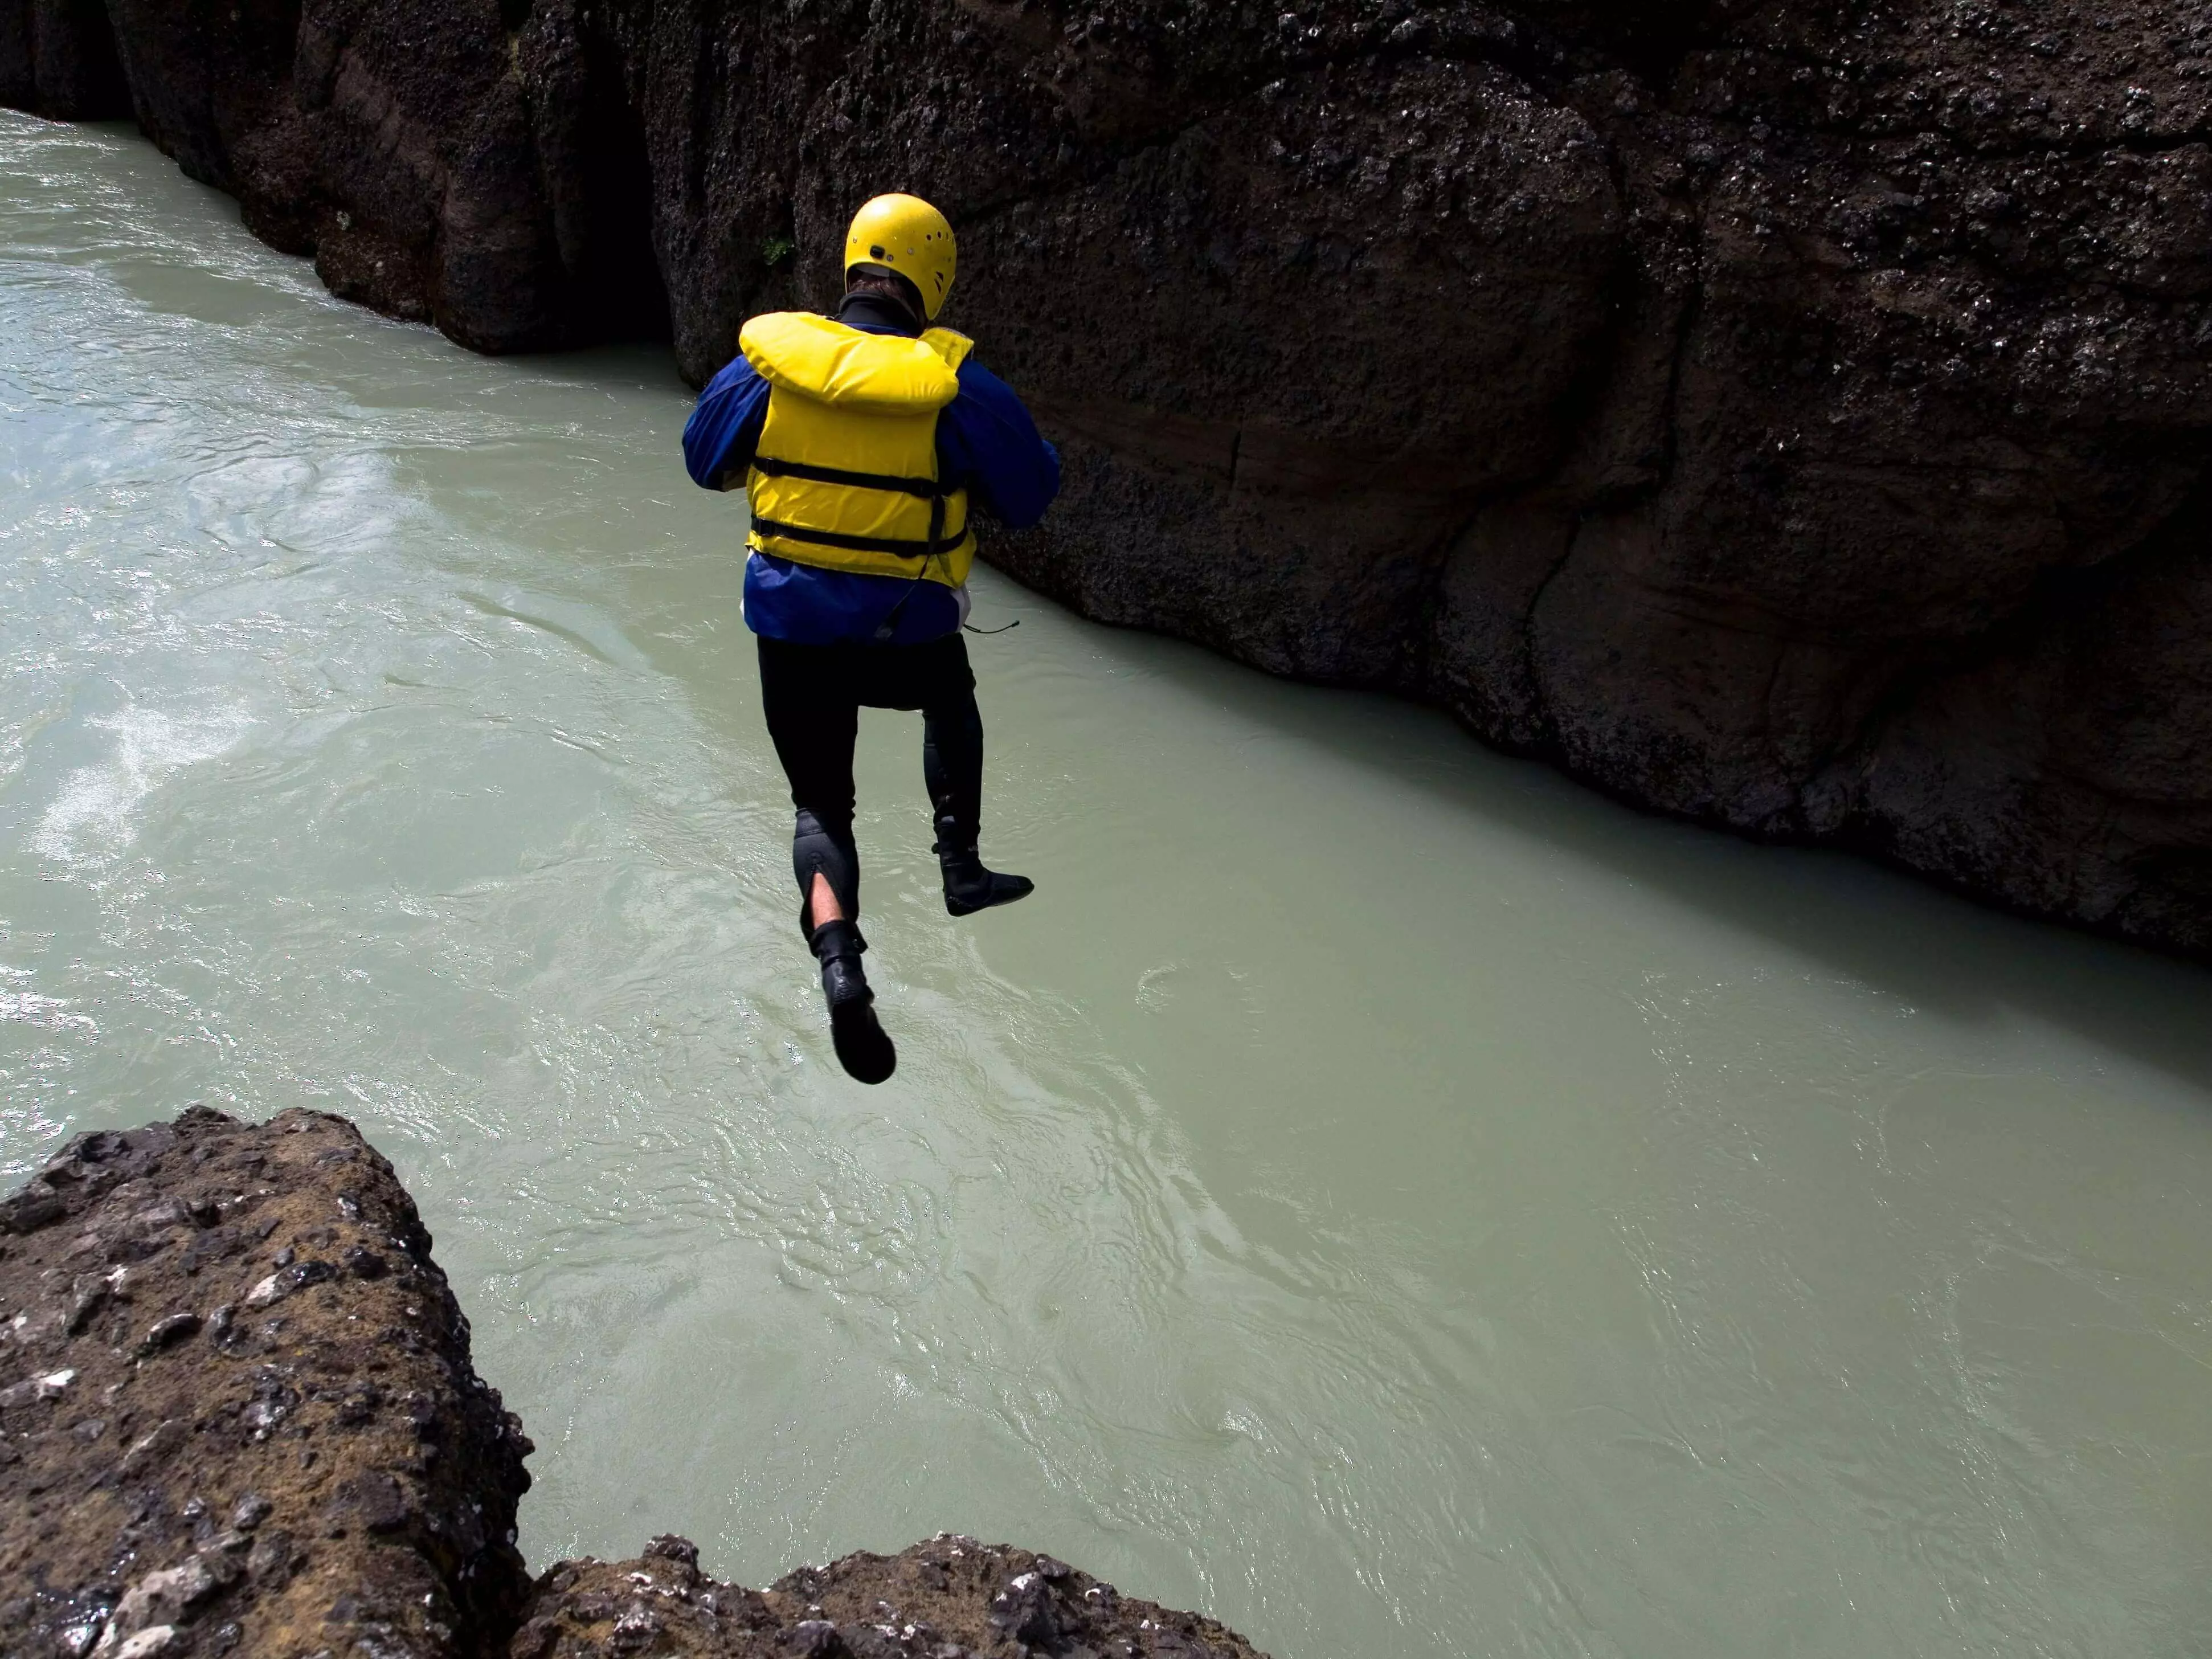 Jumping in the rafting in Gullfoss tour